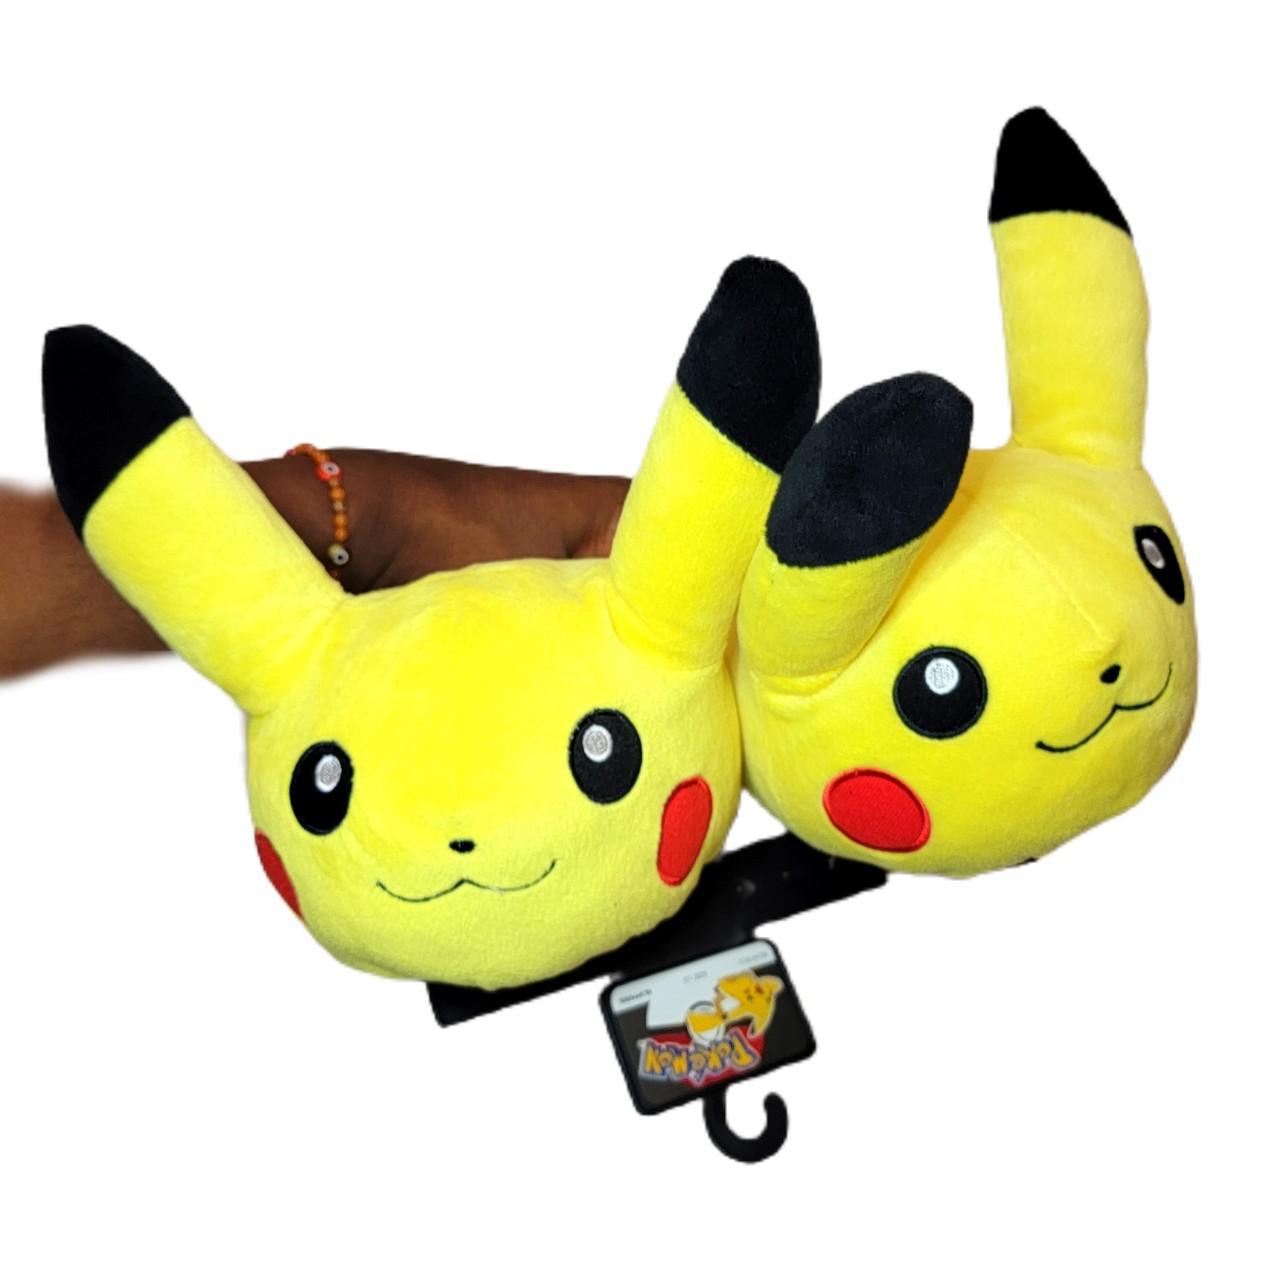 Product Image 3 - ⚡️ retro pikachu slippers ⚡️

official